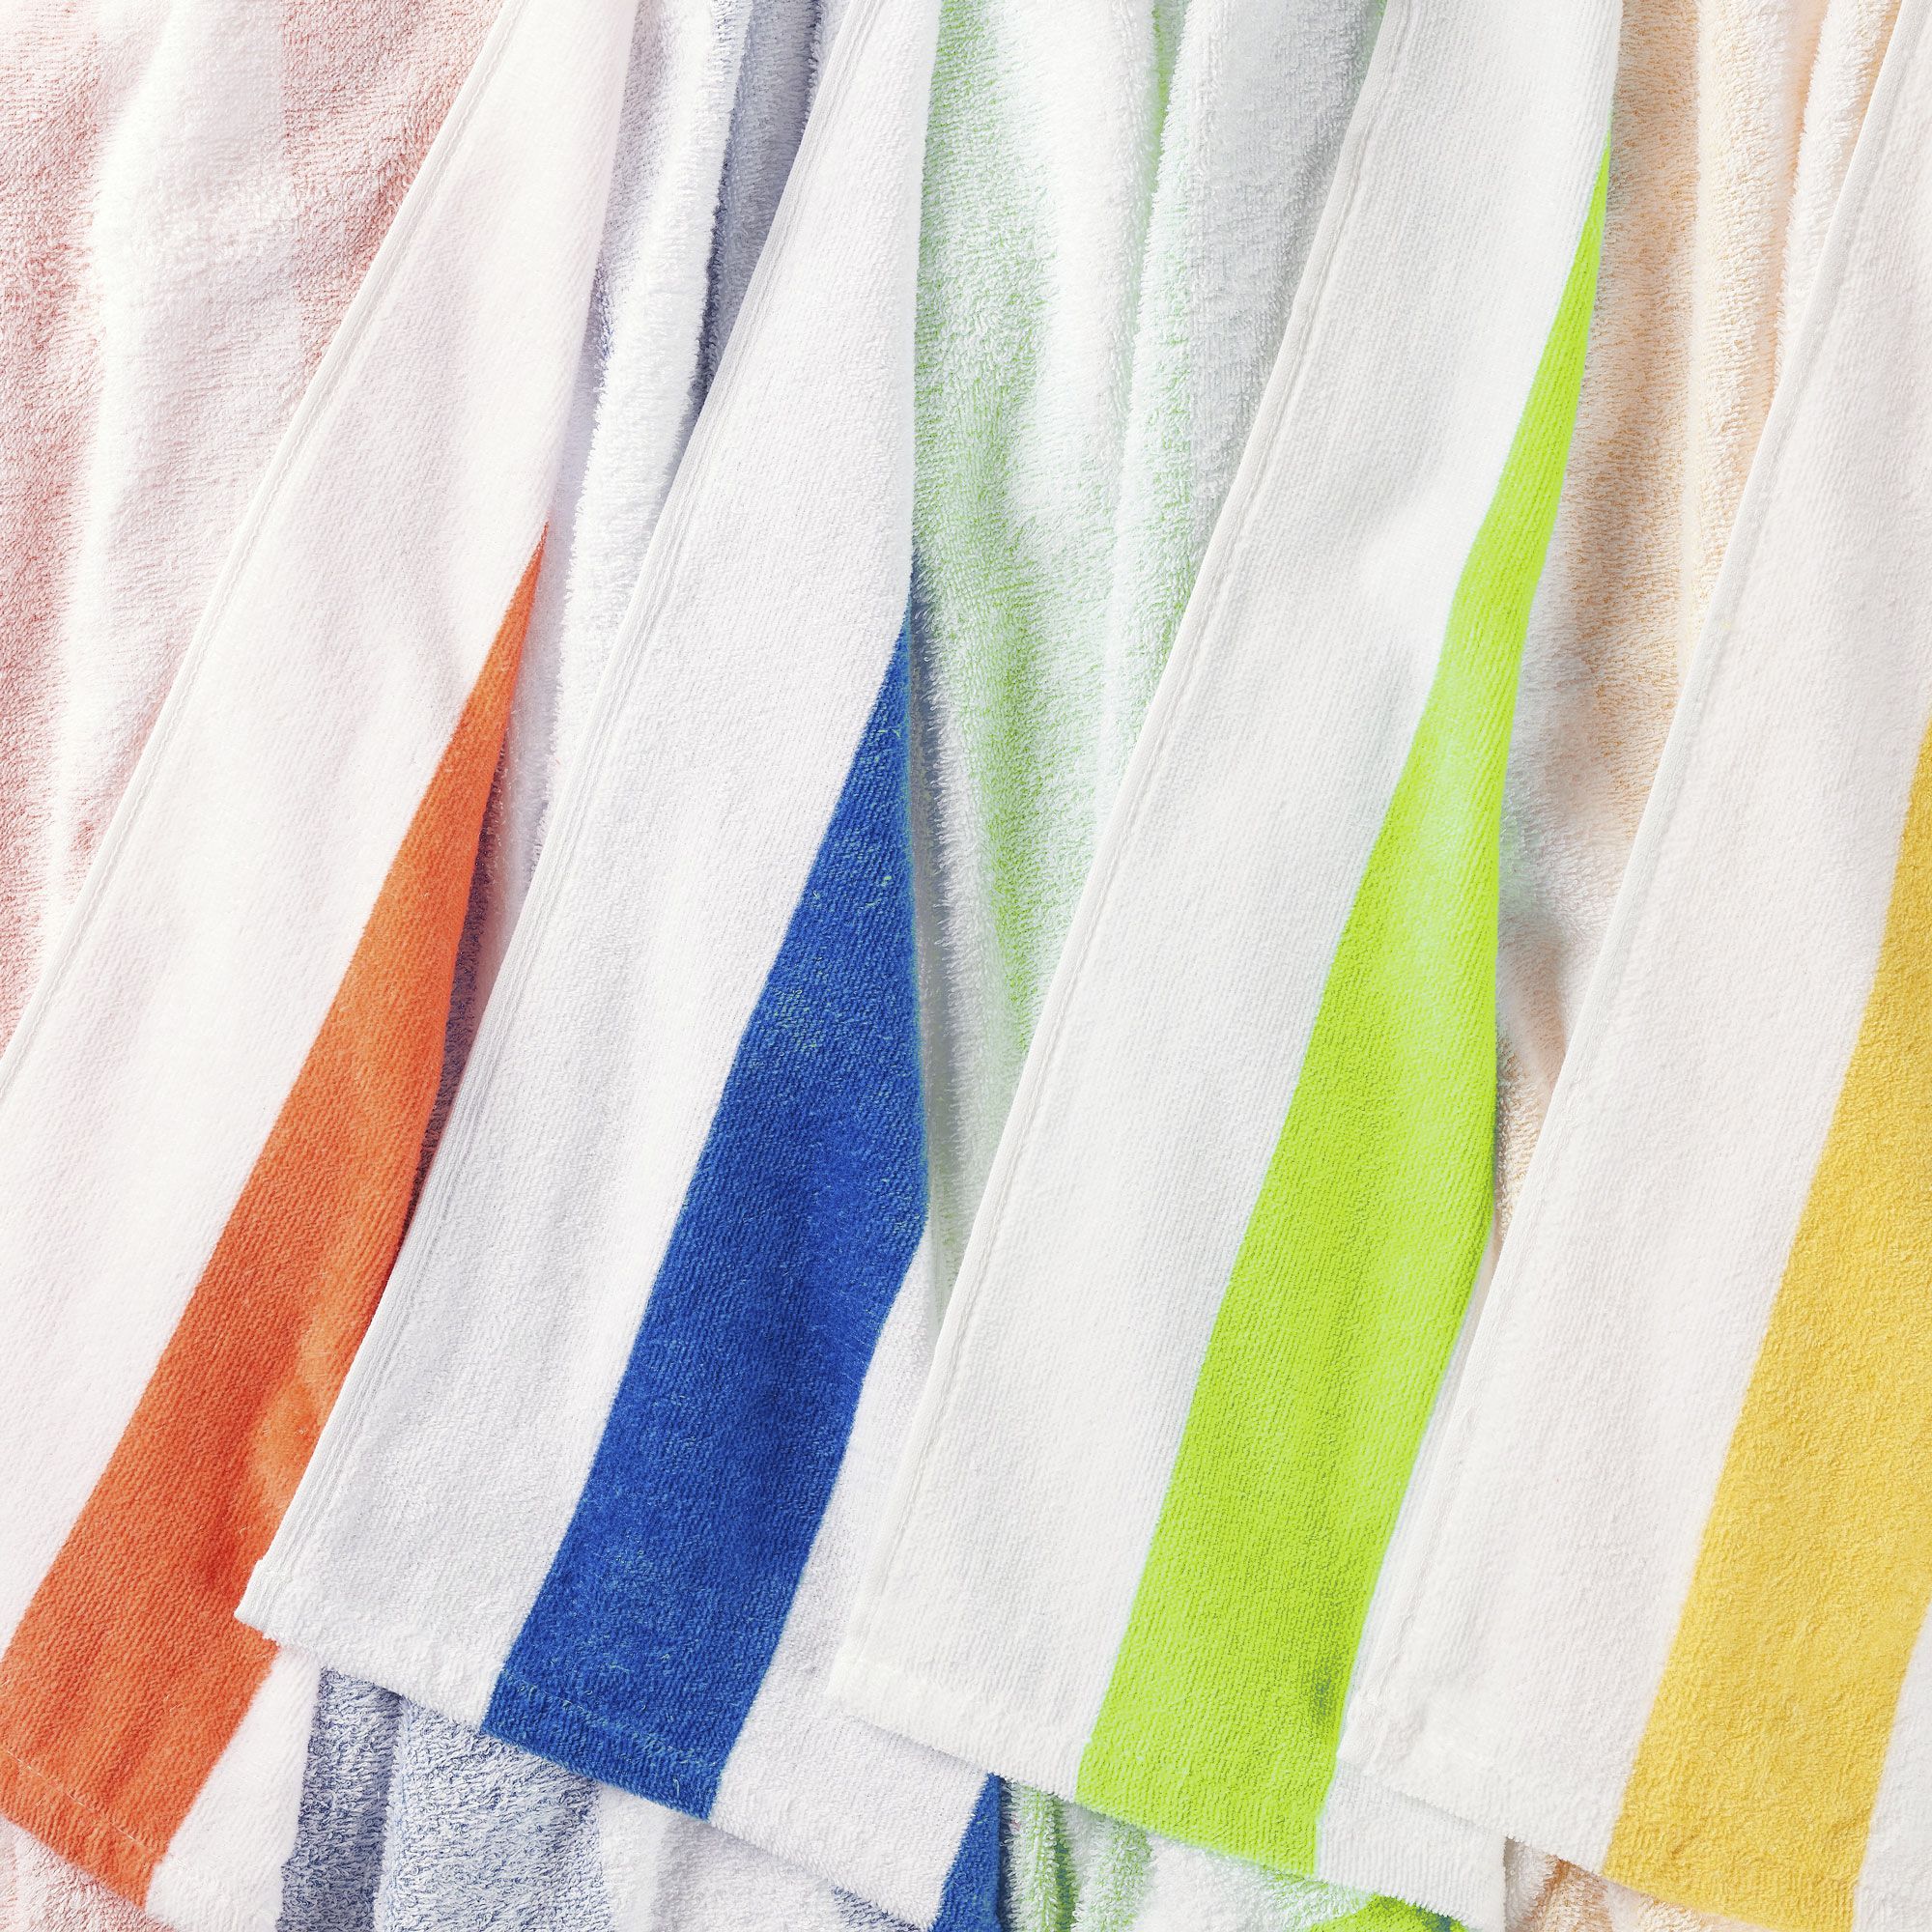 4-Pack Cabana Stripe Beach Towels, Standard Size, Assorted Colors, 28 in x 60 in - image 4 of 5